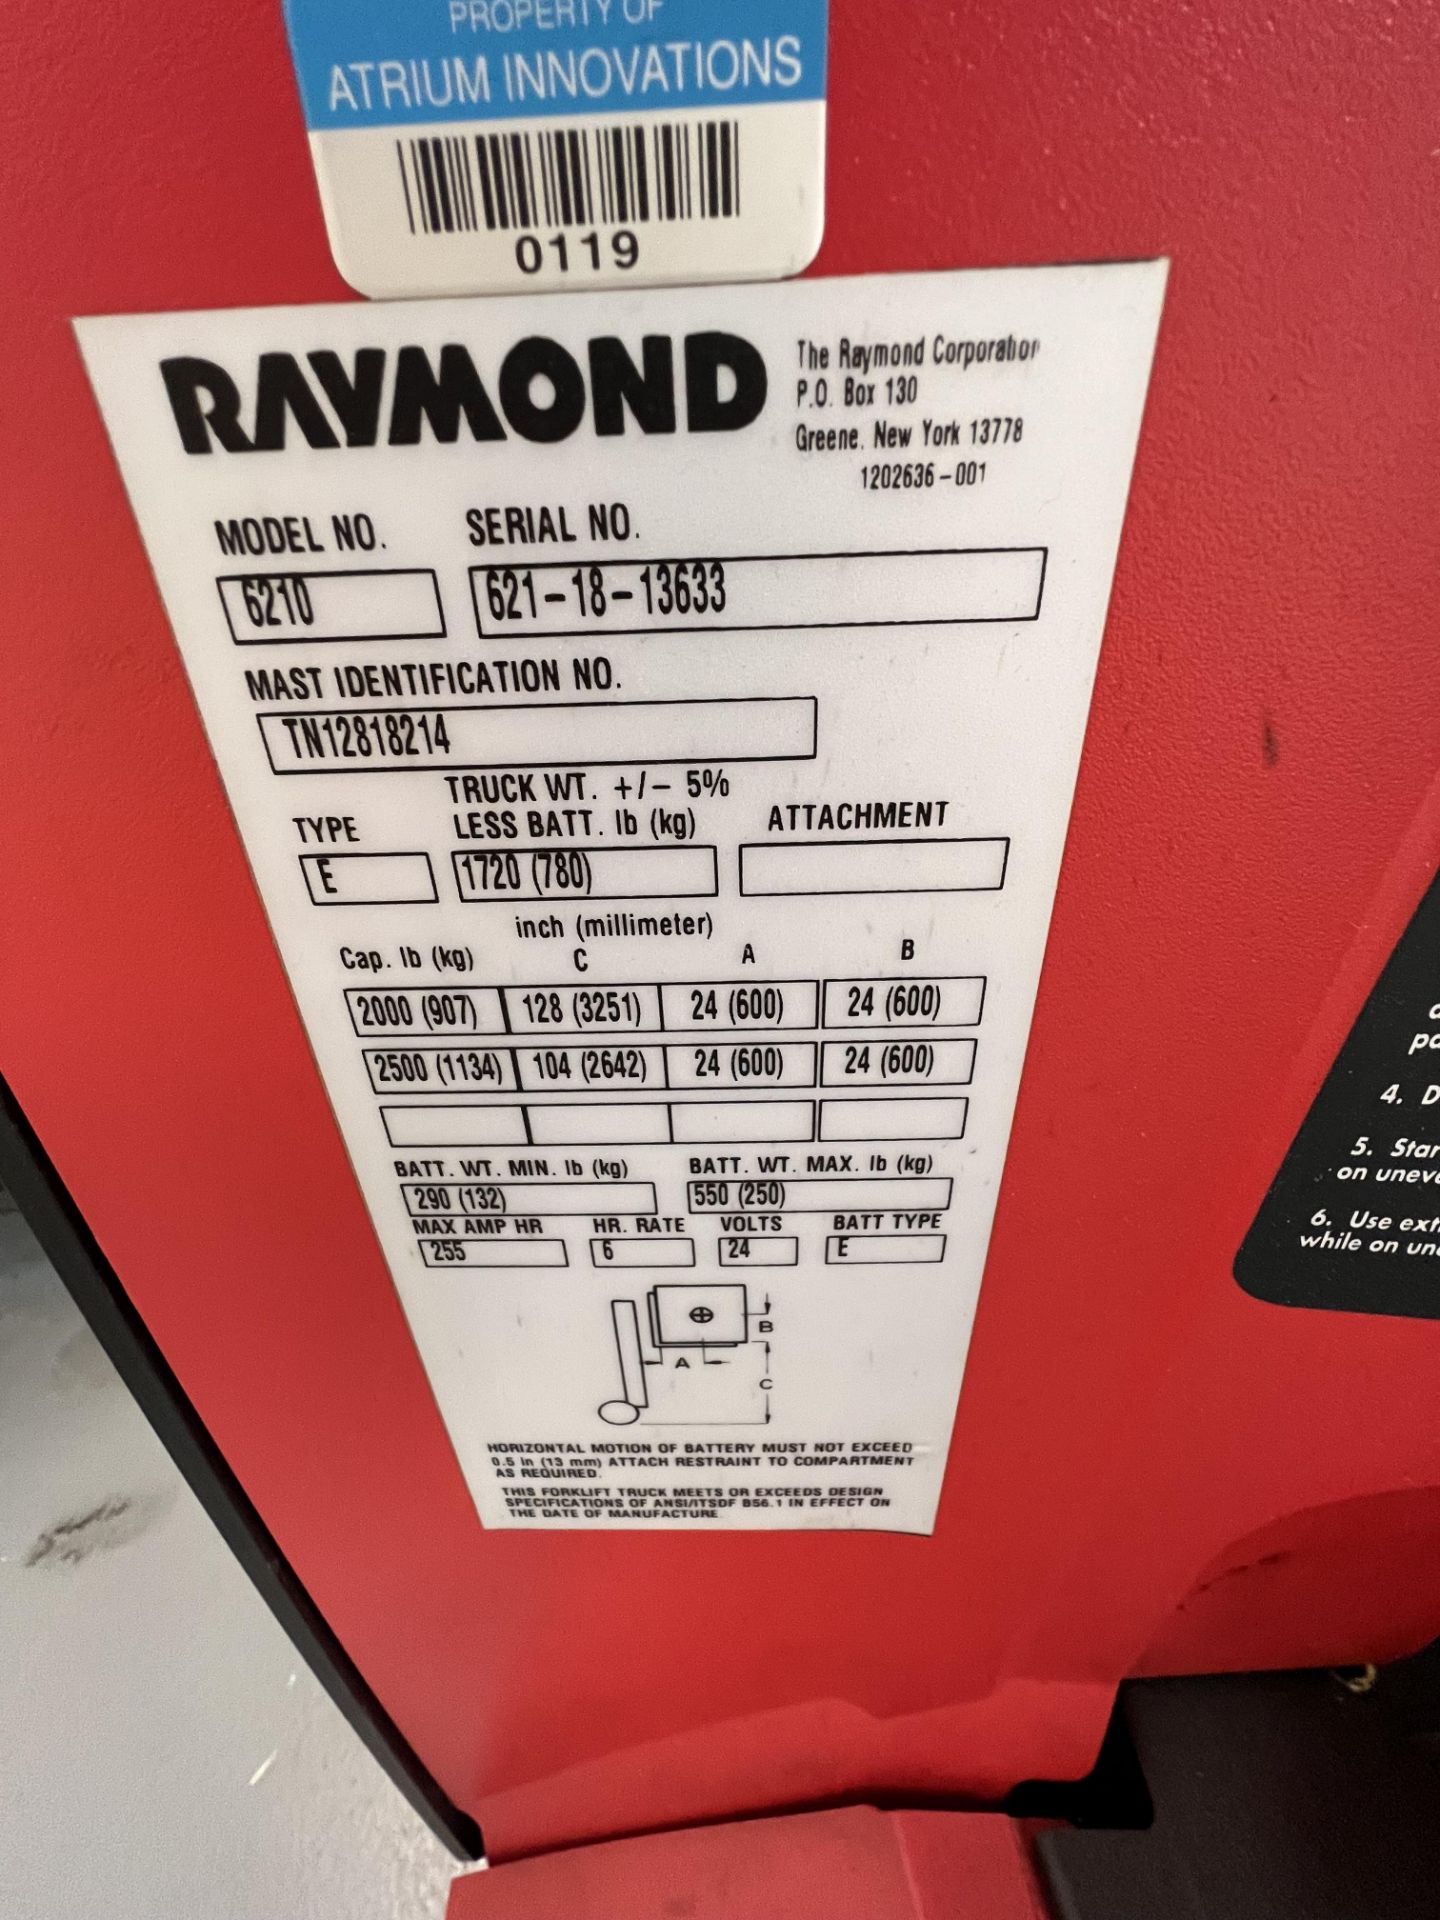 RAYMOND ELECTRIC WALK-BEHIND PALLET JACK, MODEL 6210, S/N 621-18-13633(SOLD SUBJECT TO CONFIRMATIO - Image 10 of 10